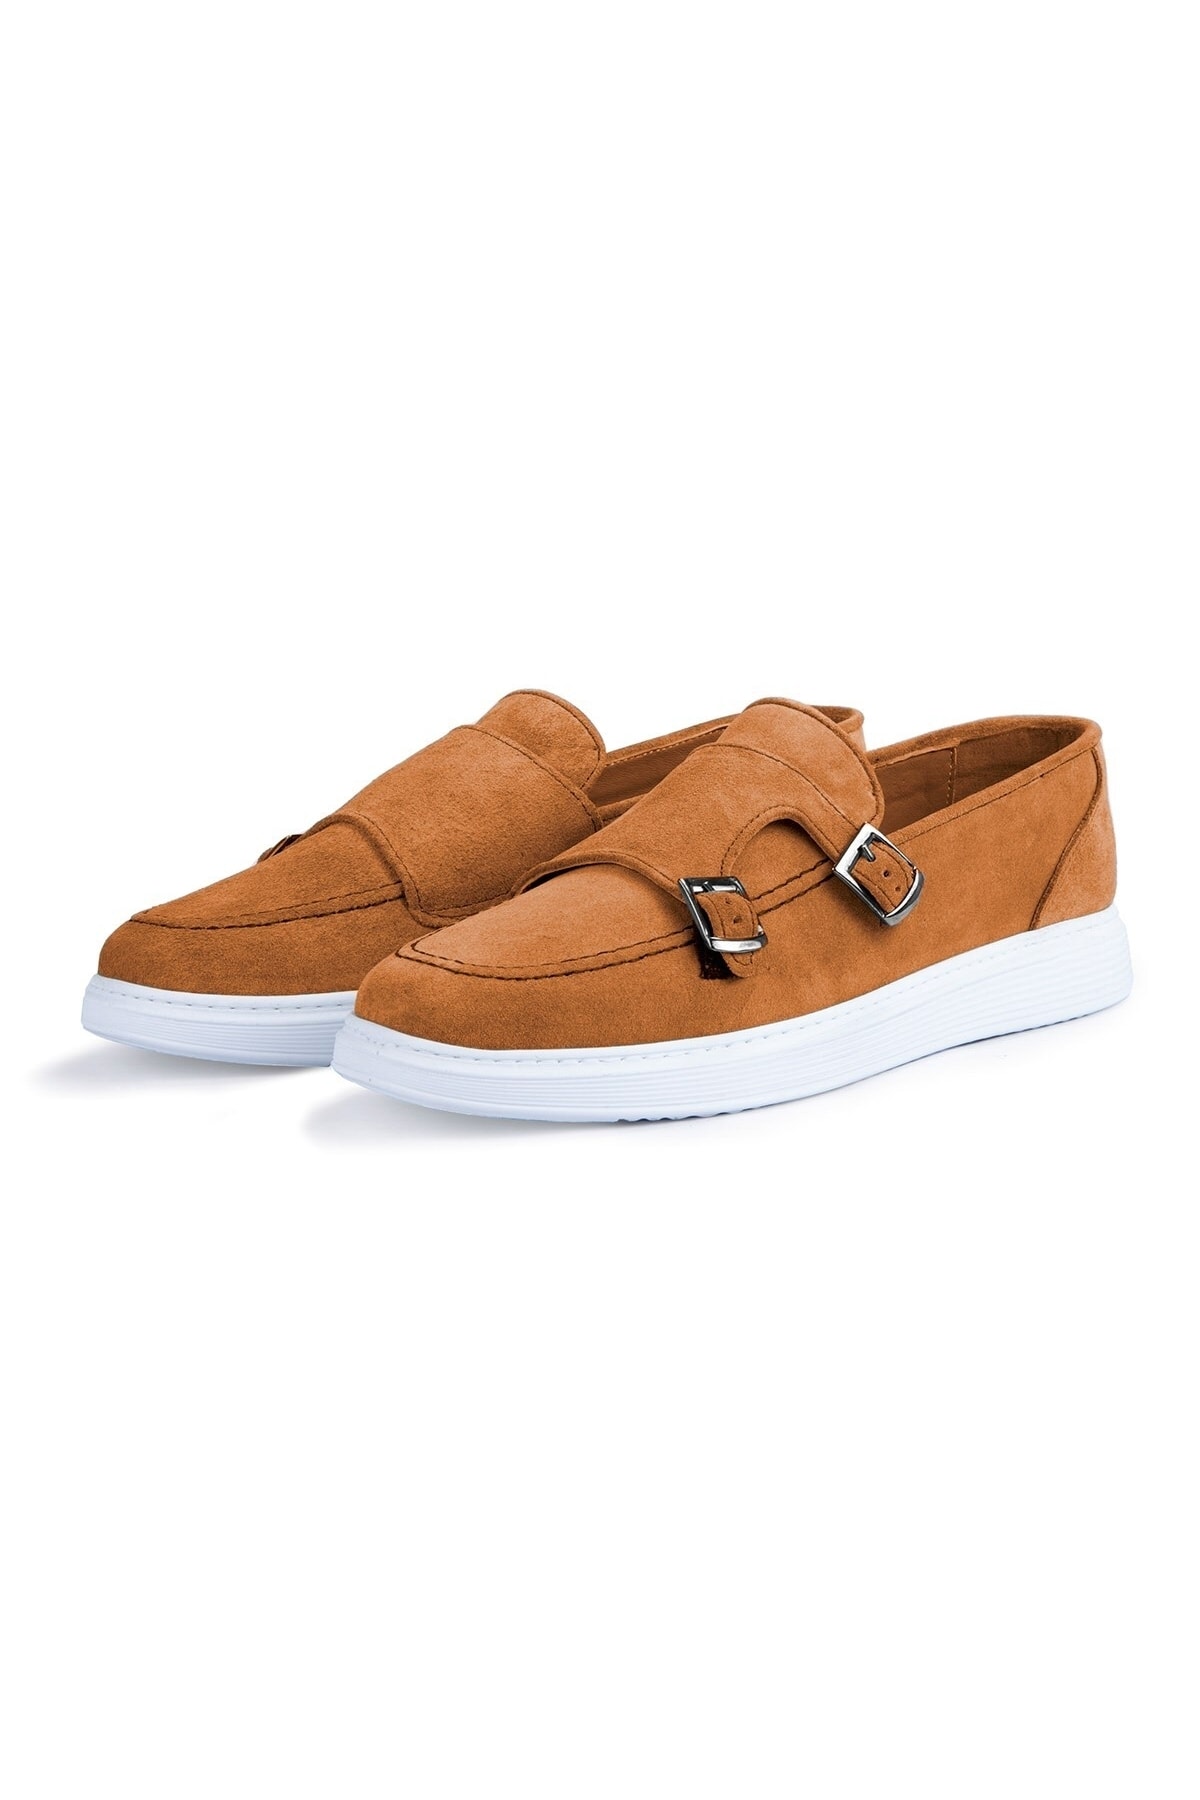 Levně Ducavelli Airy Genuine Leather and Suede Men's Casual Shoes, Suede Loafers, Summer Shoes Tan.